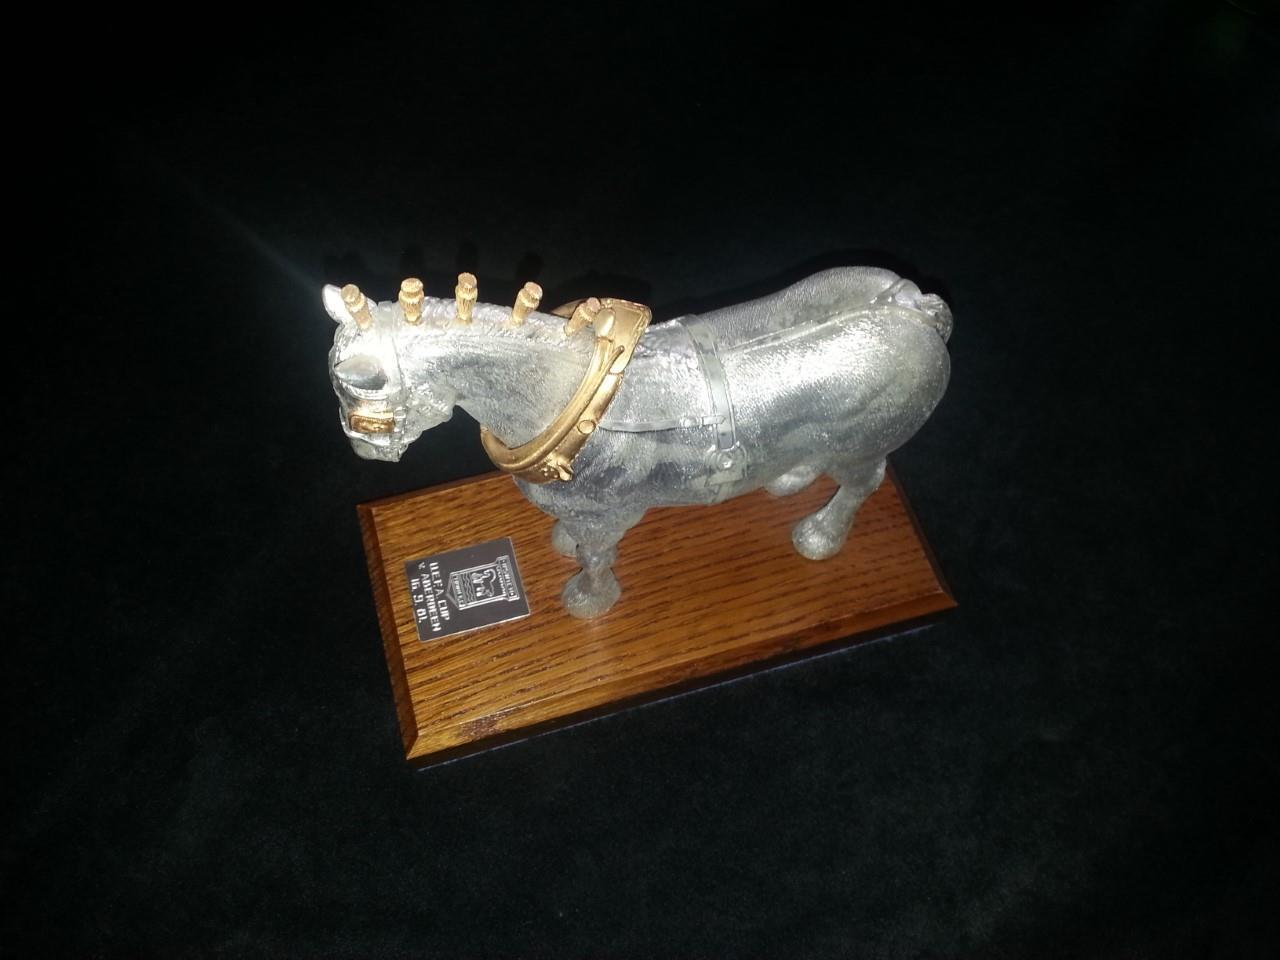 This Suffolk Punch memento was given to Aberdeen by Ipswich in 1981.